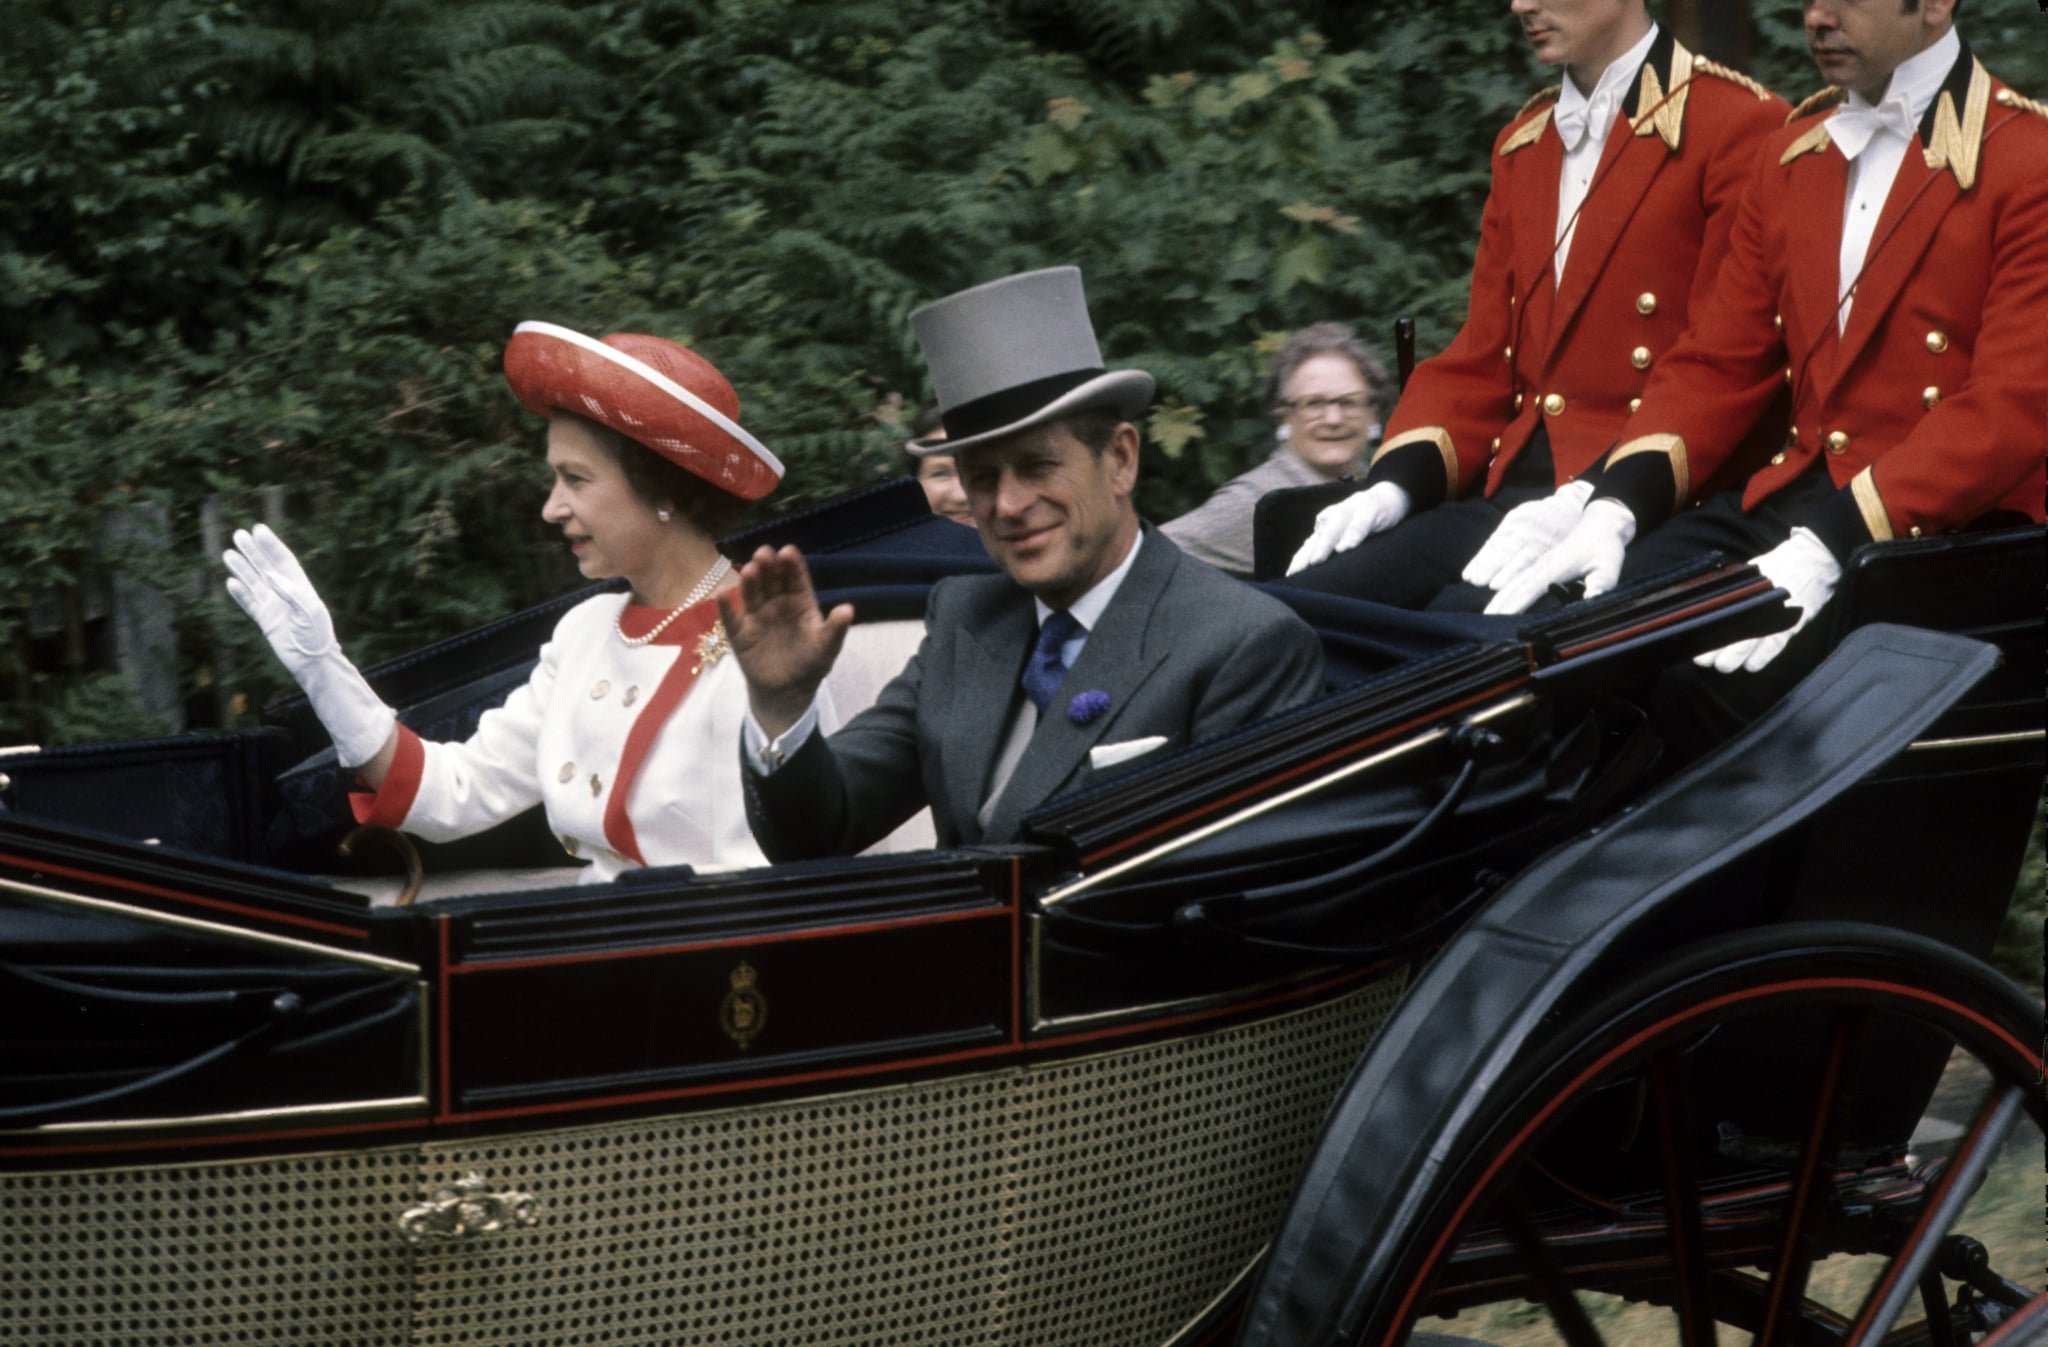 Details about   PC QUEEN ELIZABETH II PRINCE PHILIP AT ASCOT 